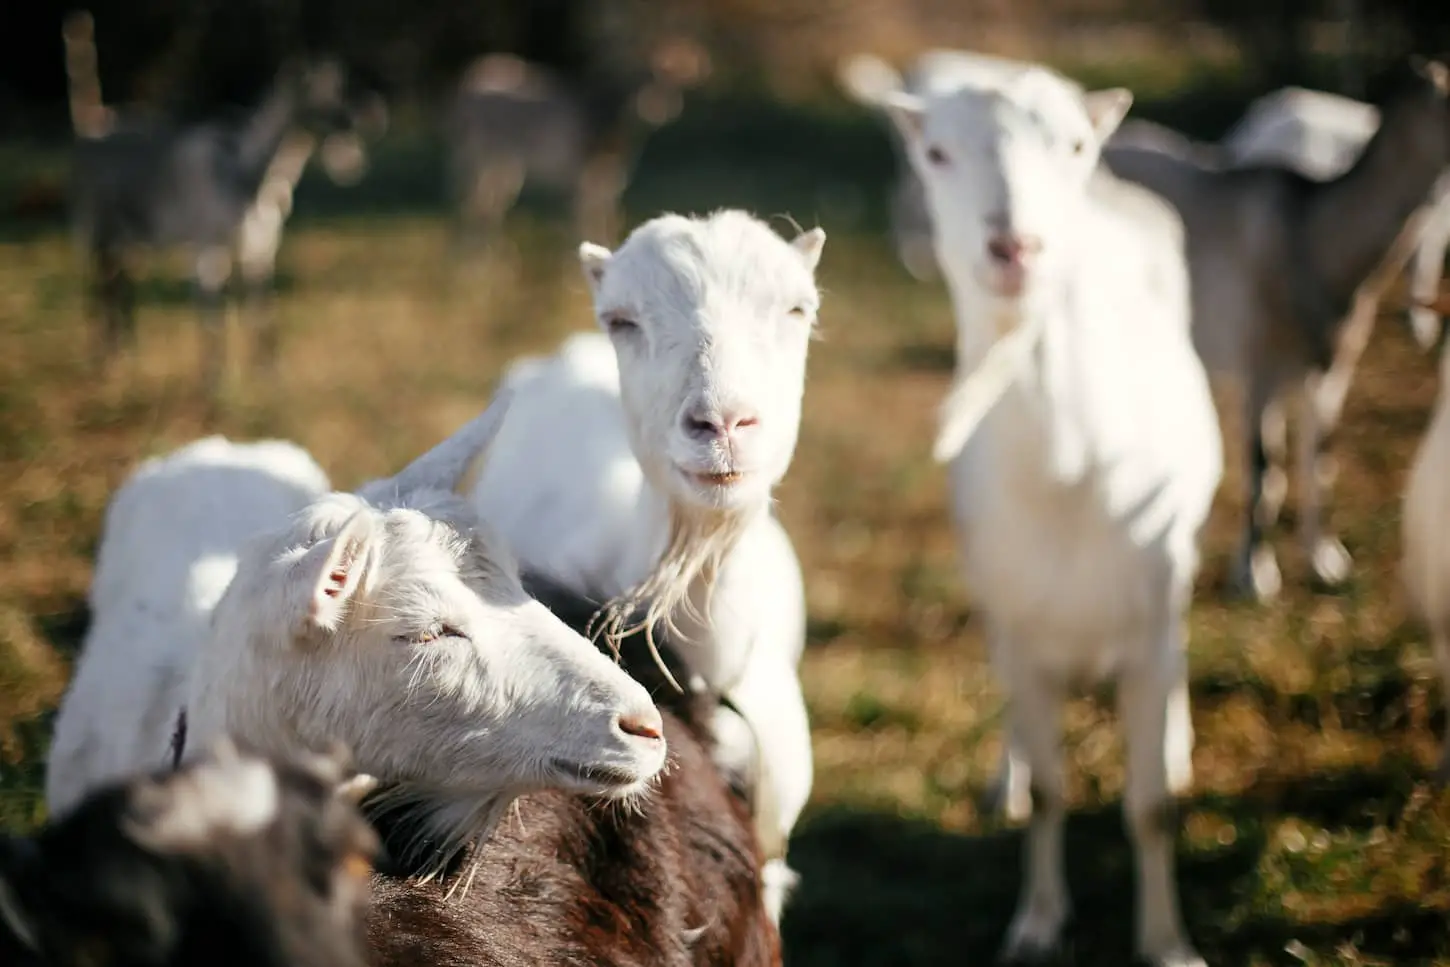 An image of Sweet goats with funny beards on background of other goats grazing.